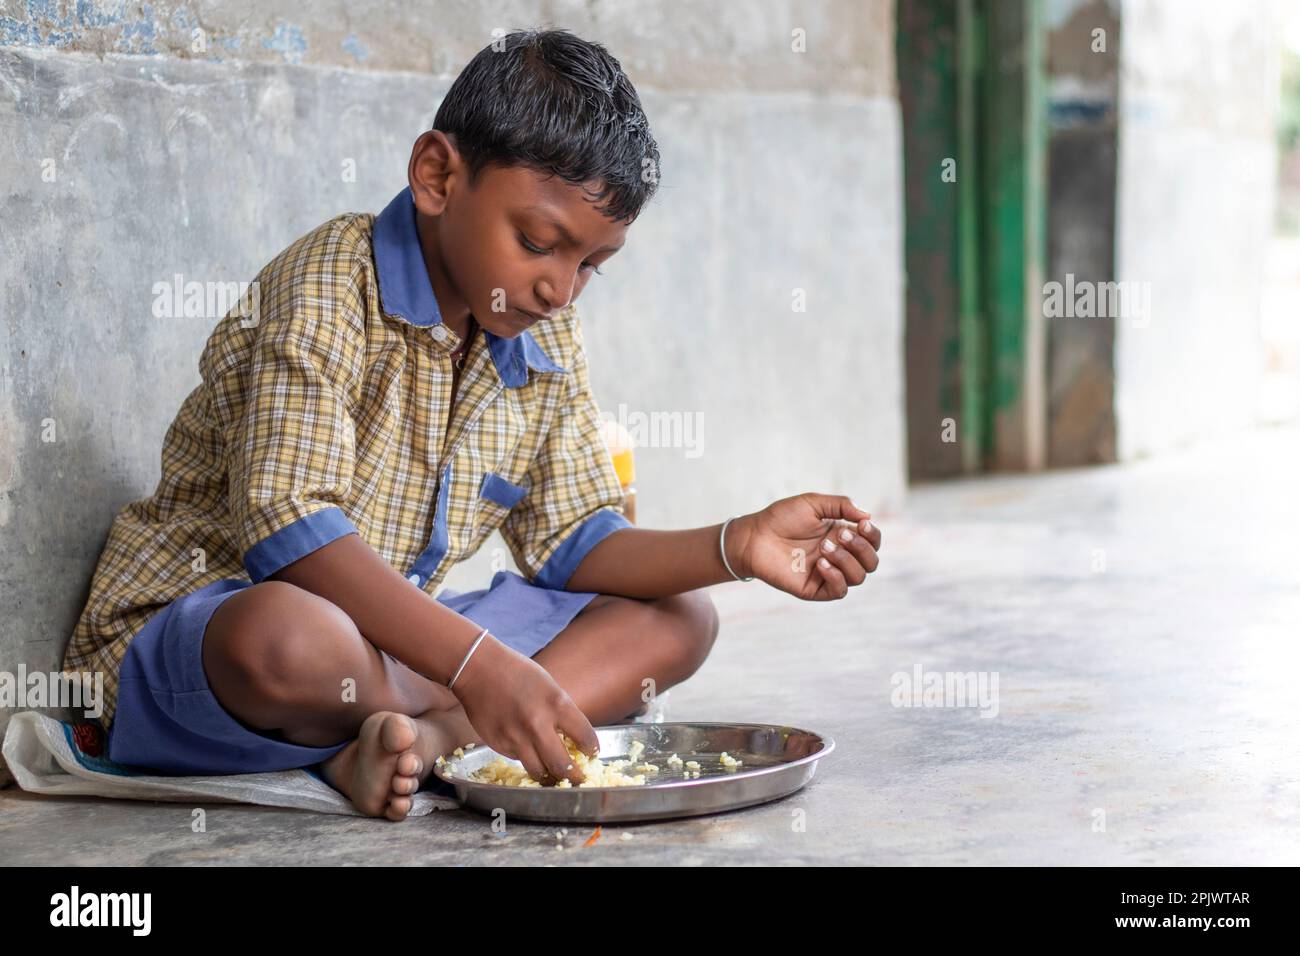 Student having mid day meal at school Stock Photo